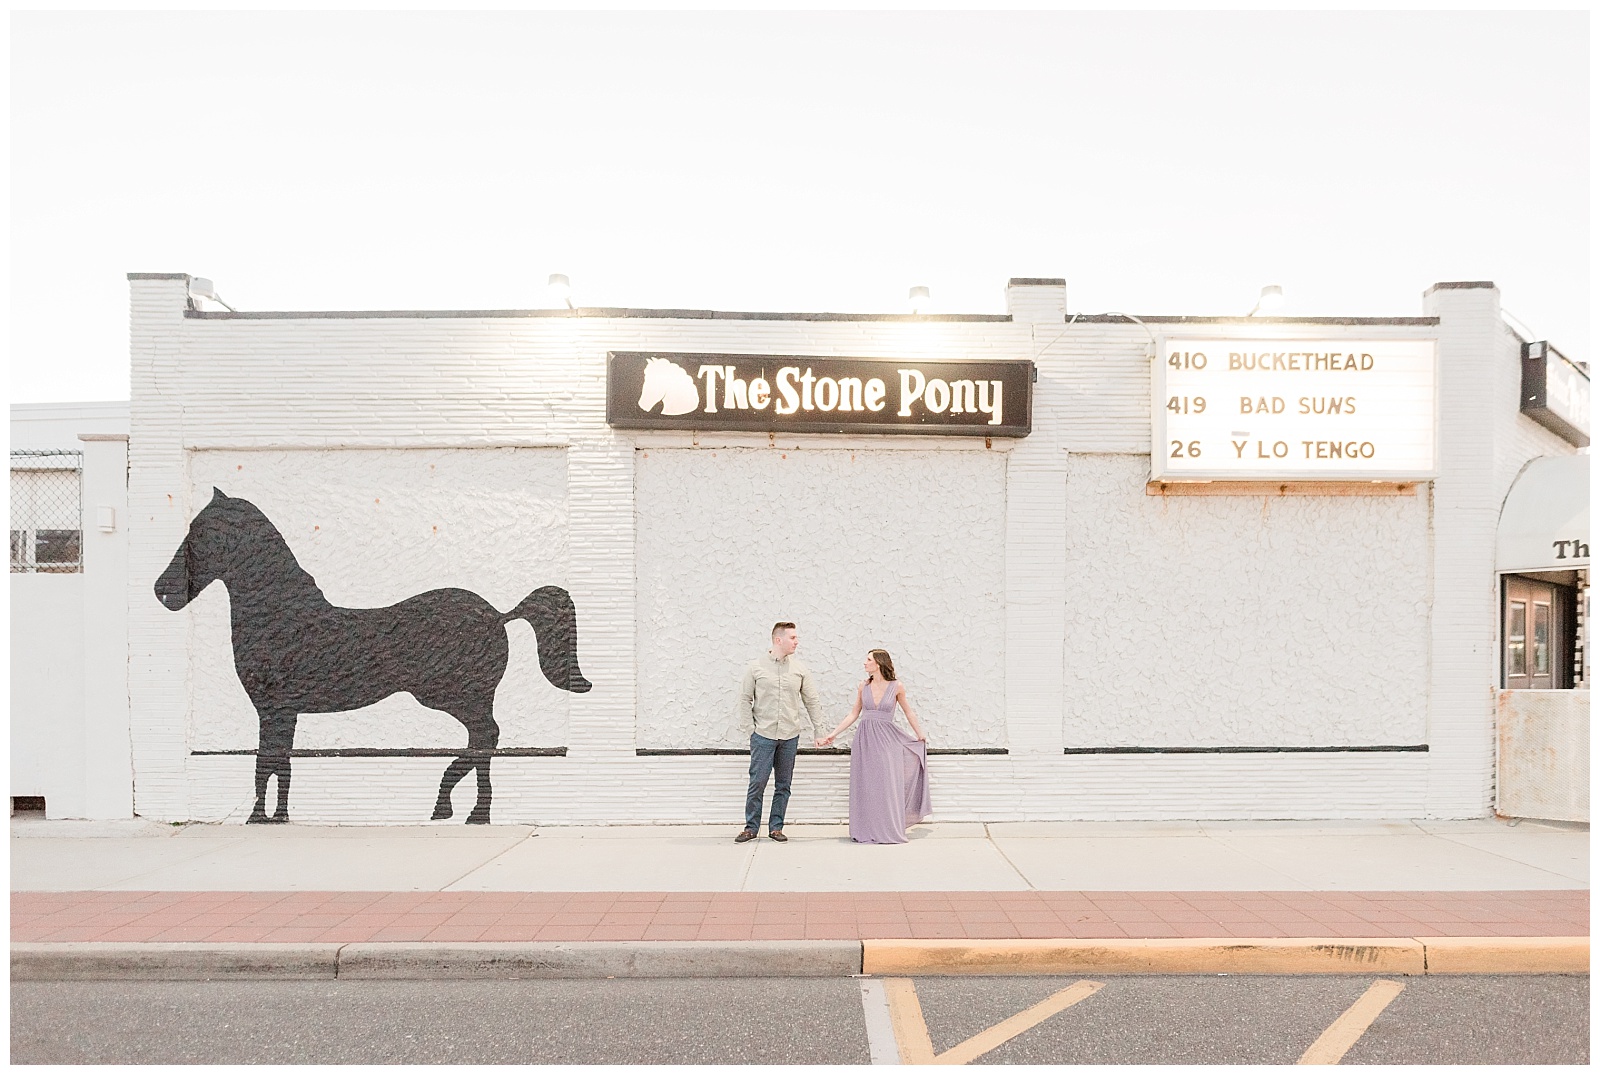 New Jersey, Engagement Session, Asbury Park, NJ, Wedding Photographer, Springtime, Light and Airy, Golden Hour, Stone Pony, Iconic